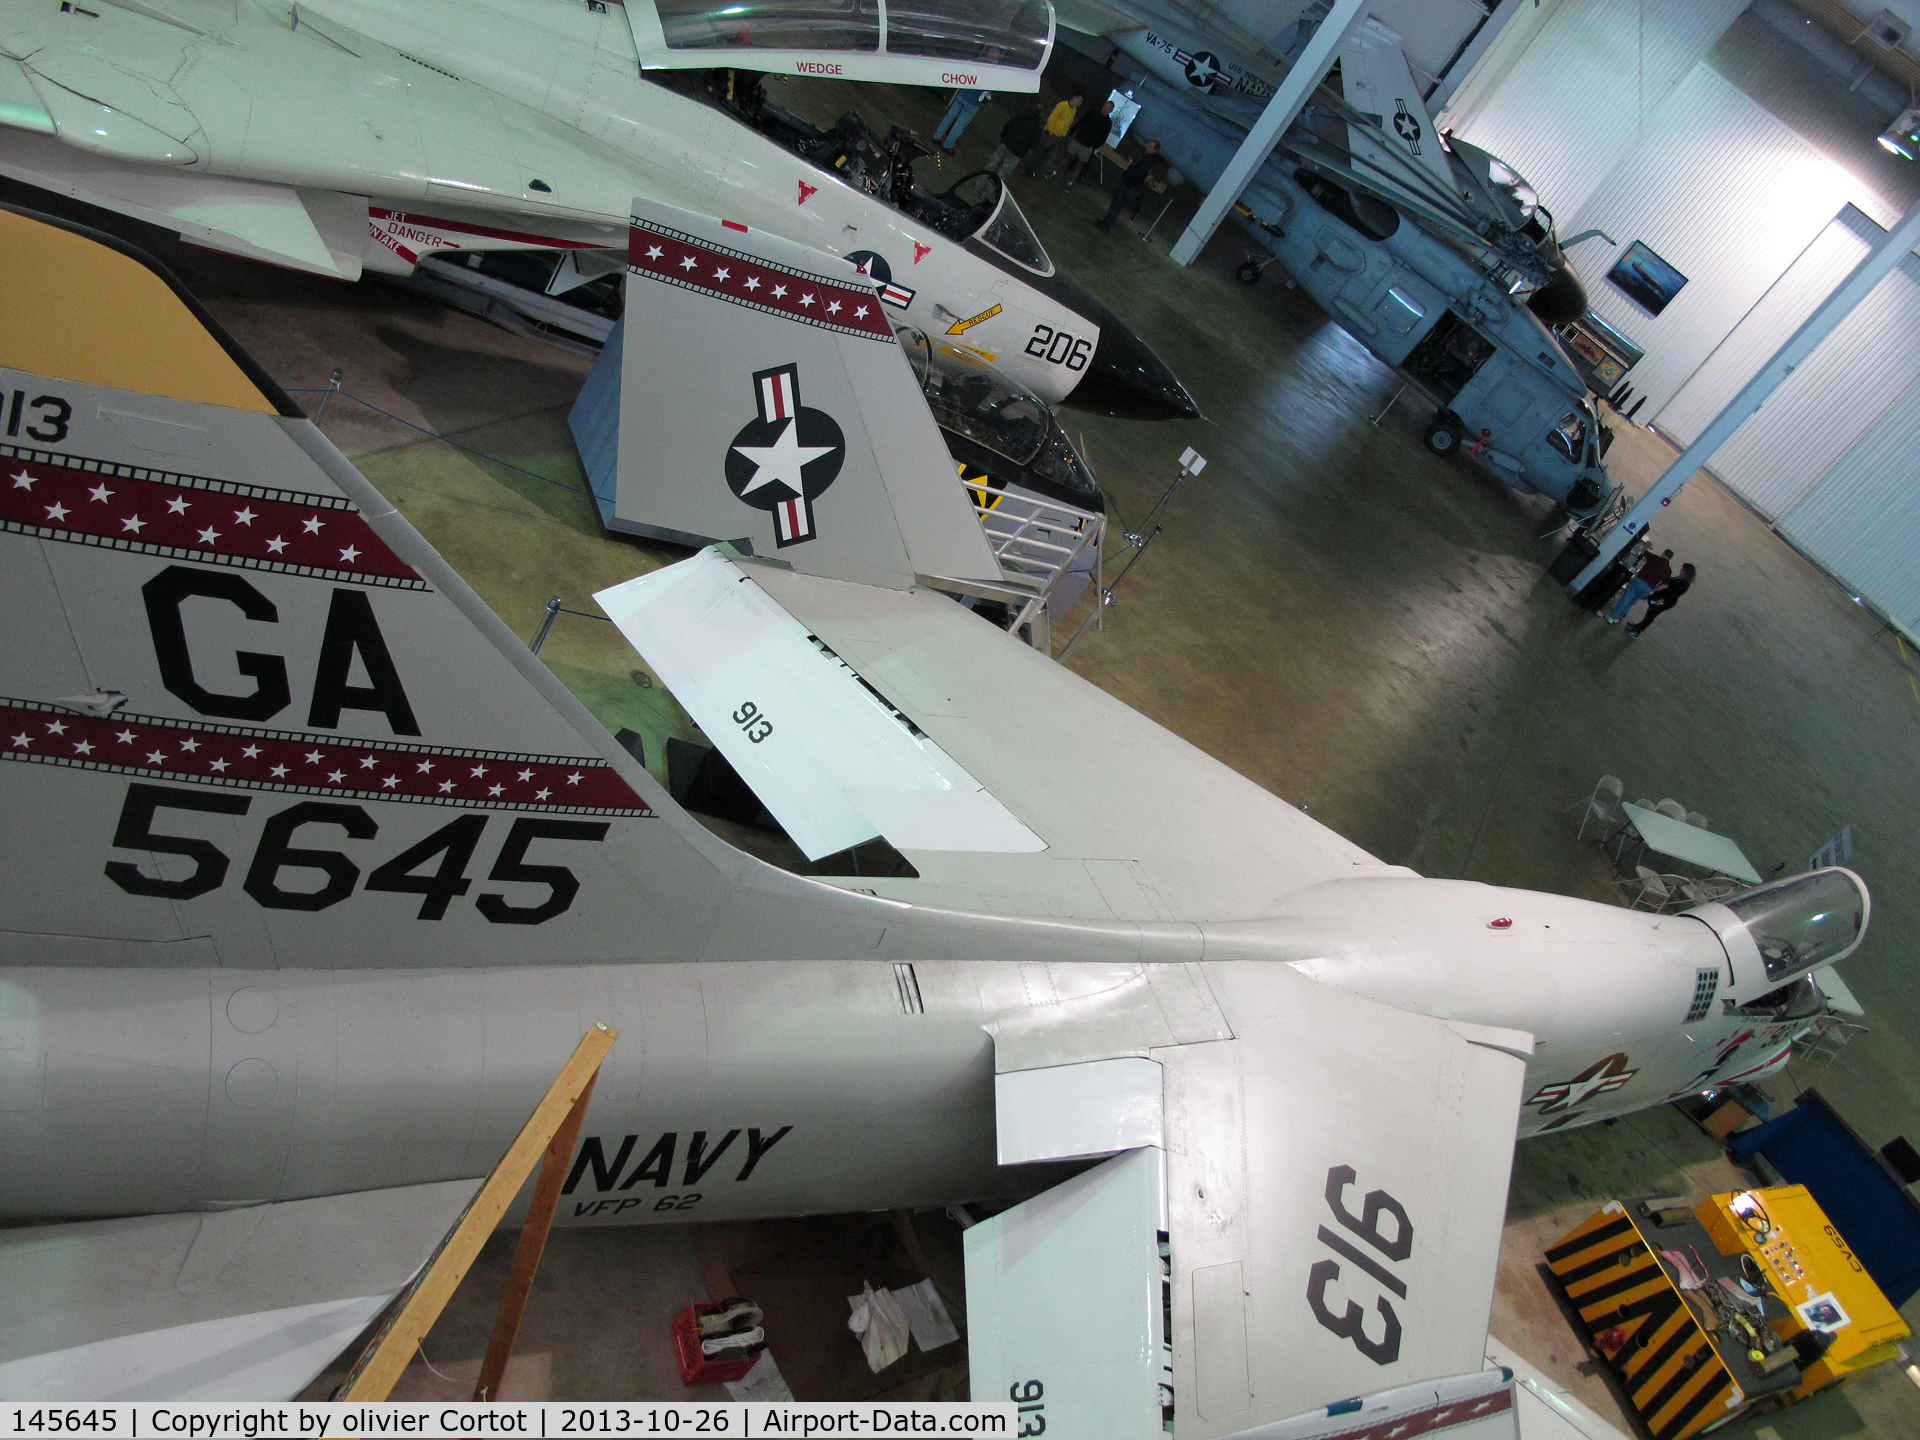 145645, Vought RF-8G Crusader C/N 519, view from above